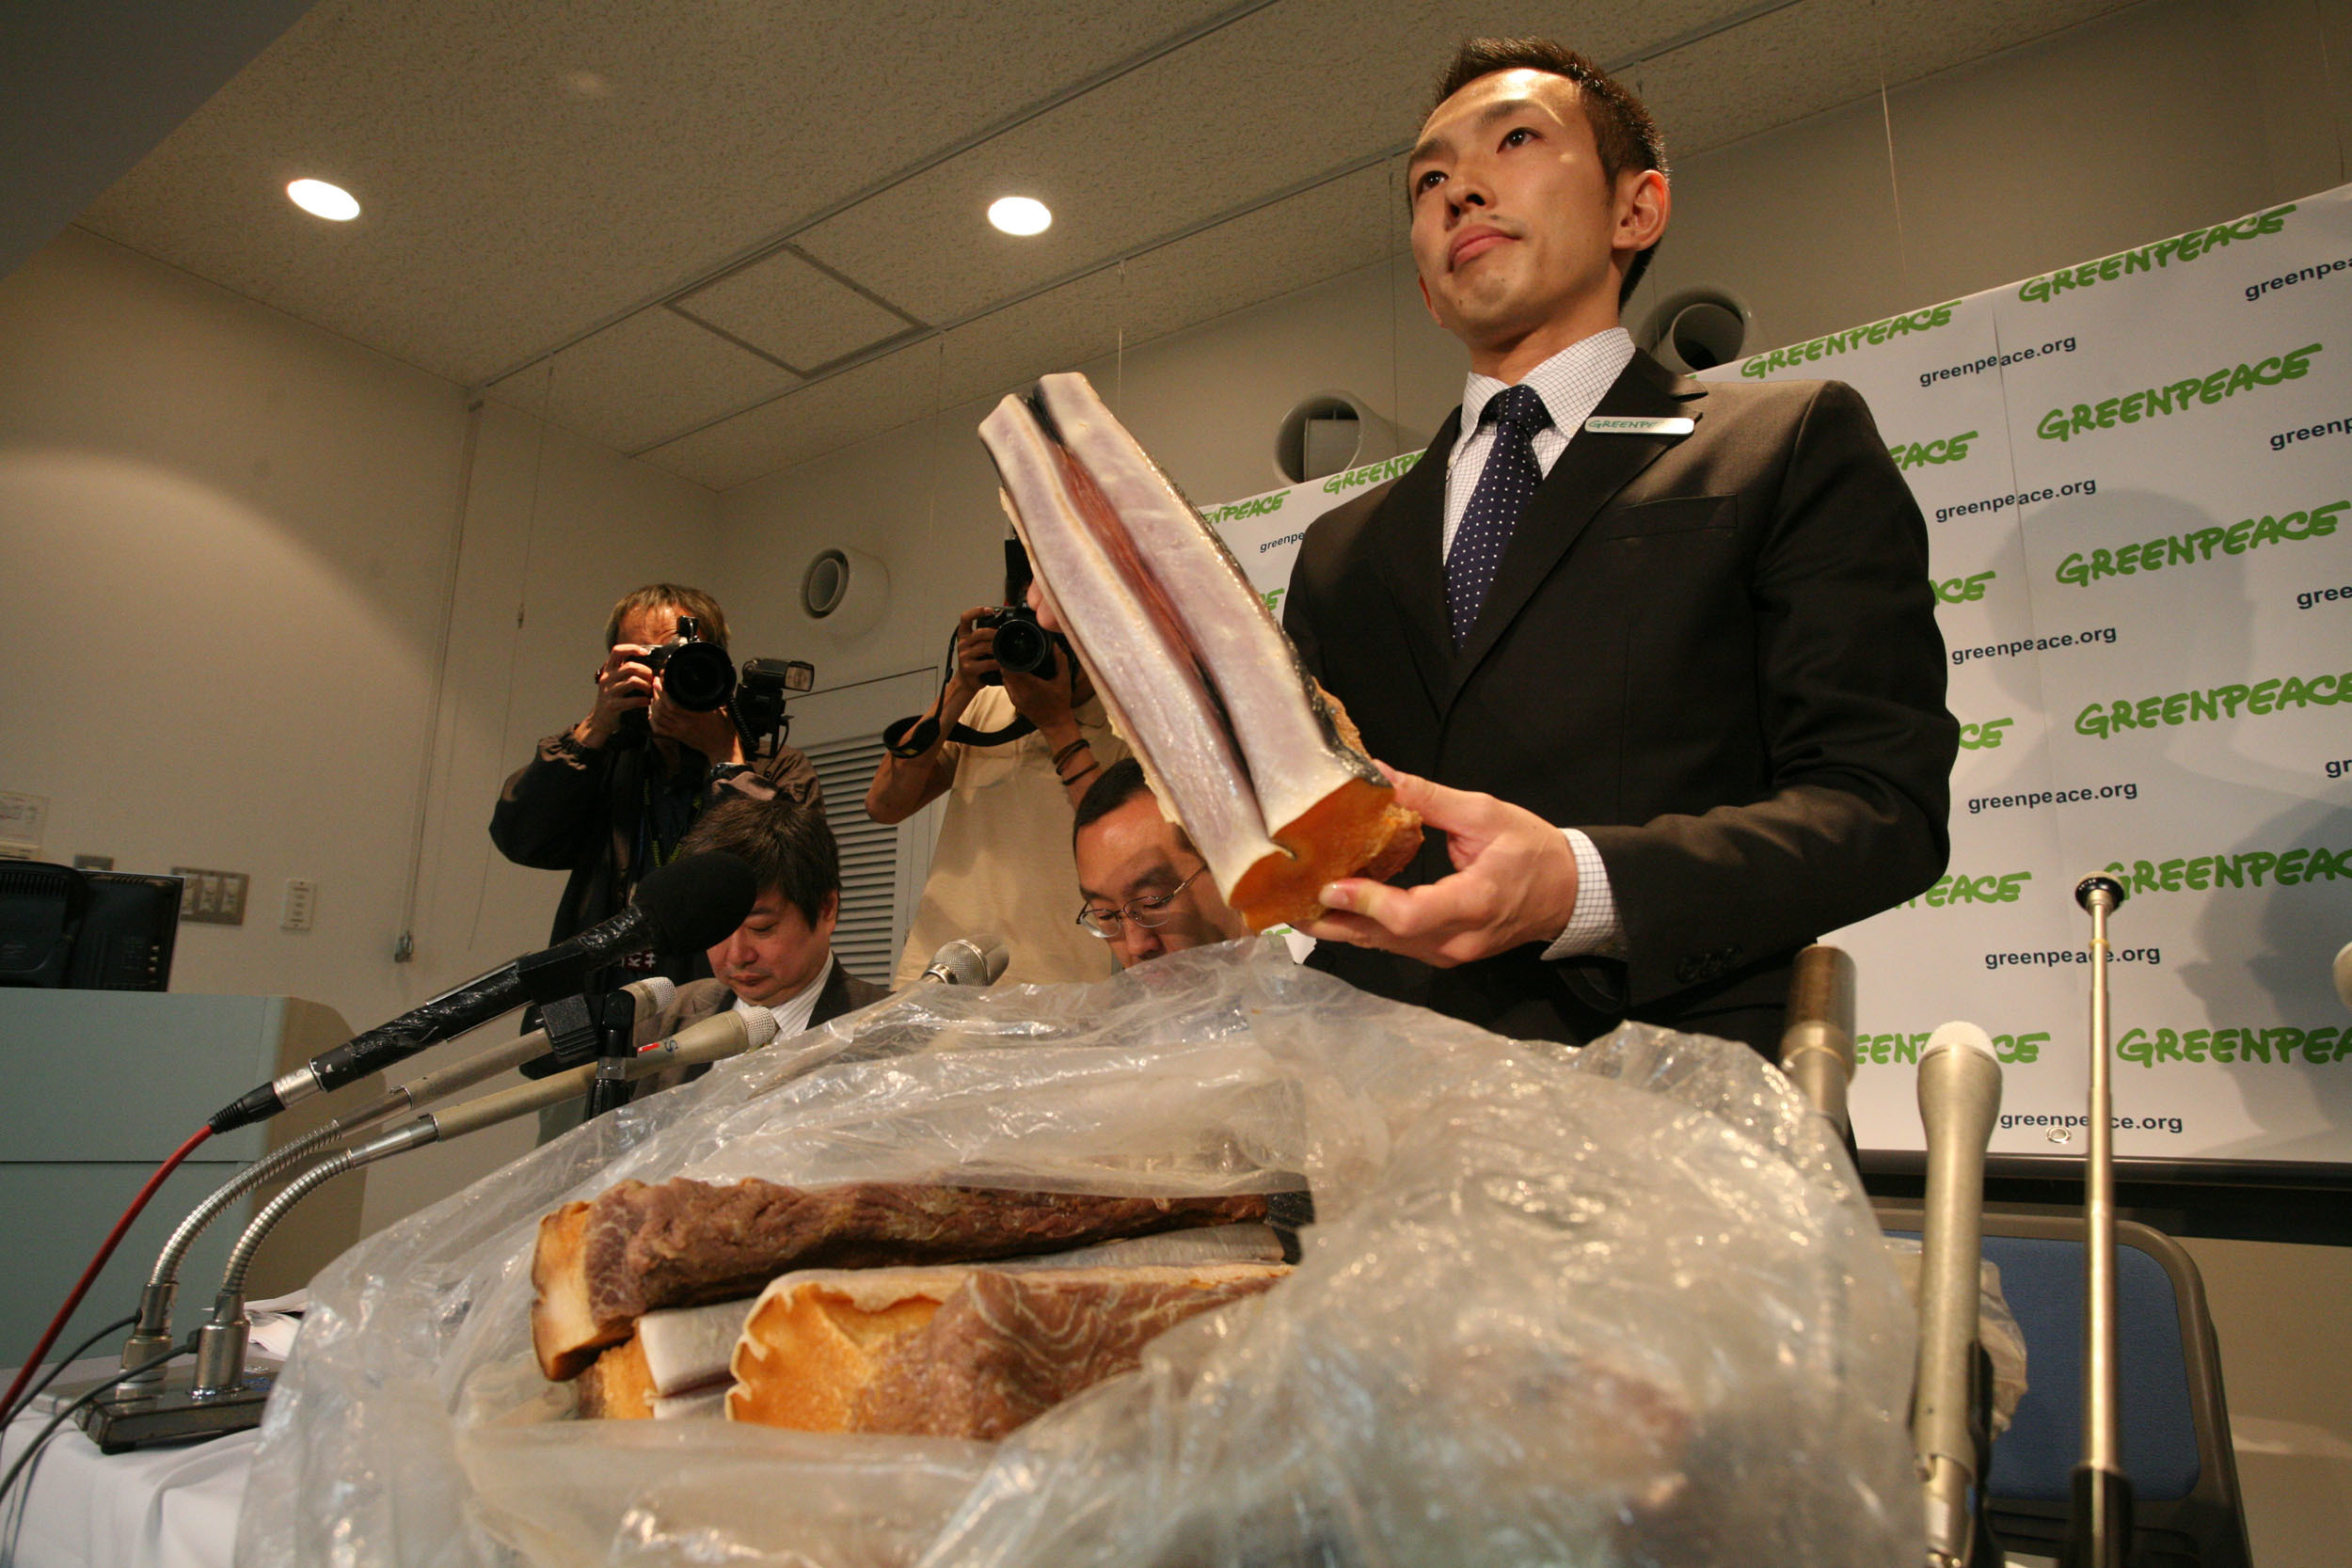 A man holding a large slice of whale meat with more meat in a bag on the table in front of him